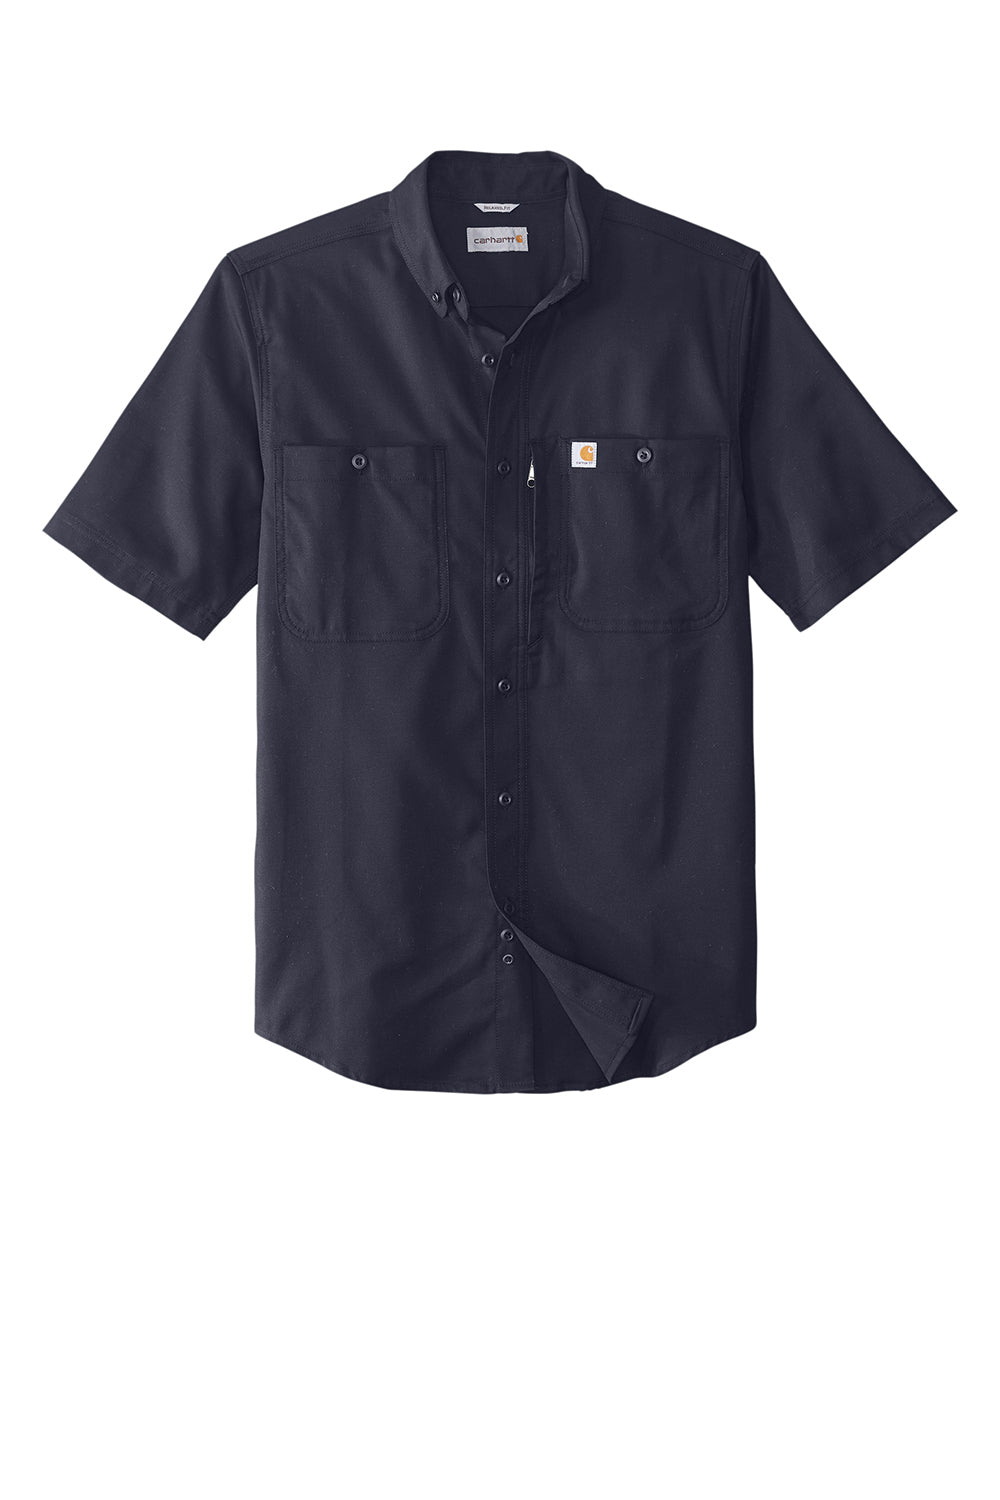 Carhartt CT102537 Mens Rugged Professional Series Wrinkle Resistant Short Sleeve Button Down Shirt w/ Pocket Navy Blue Flat Front